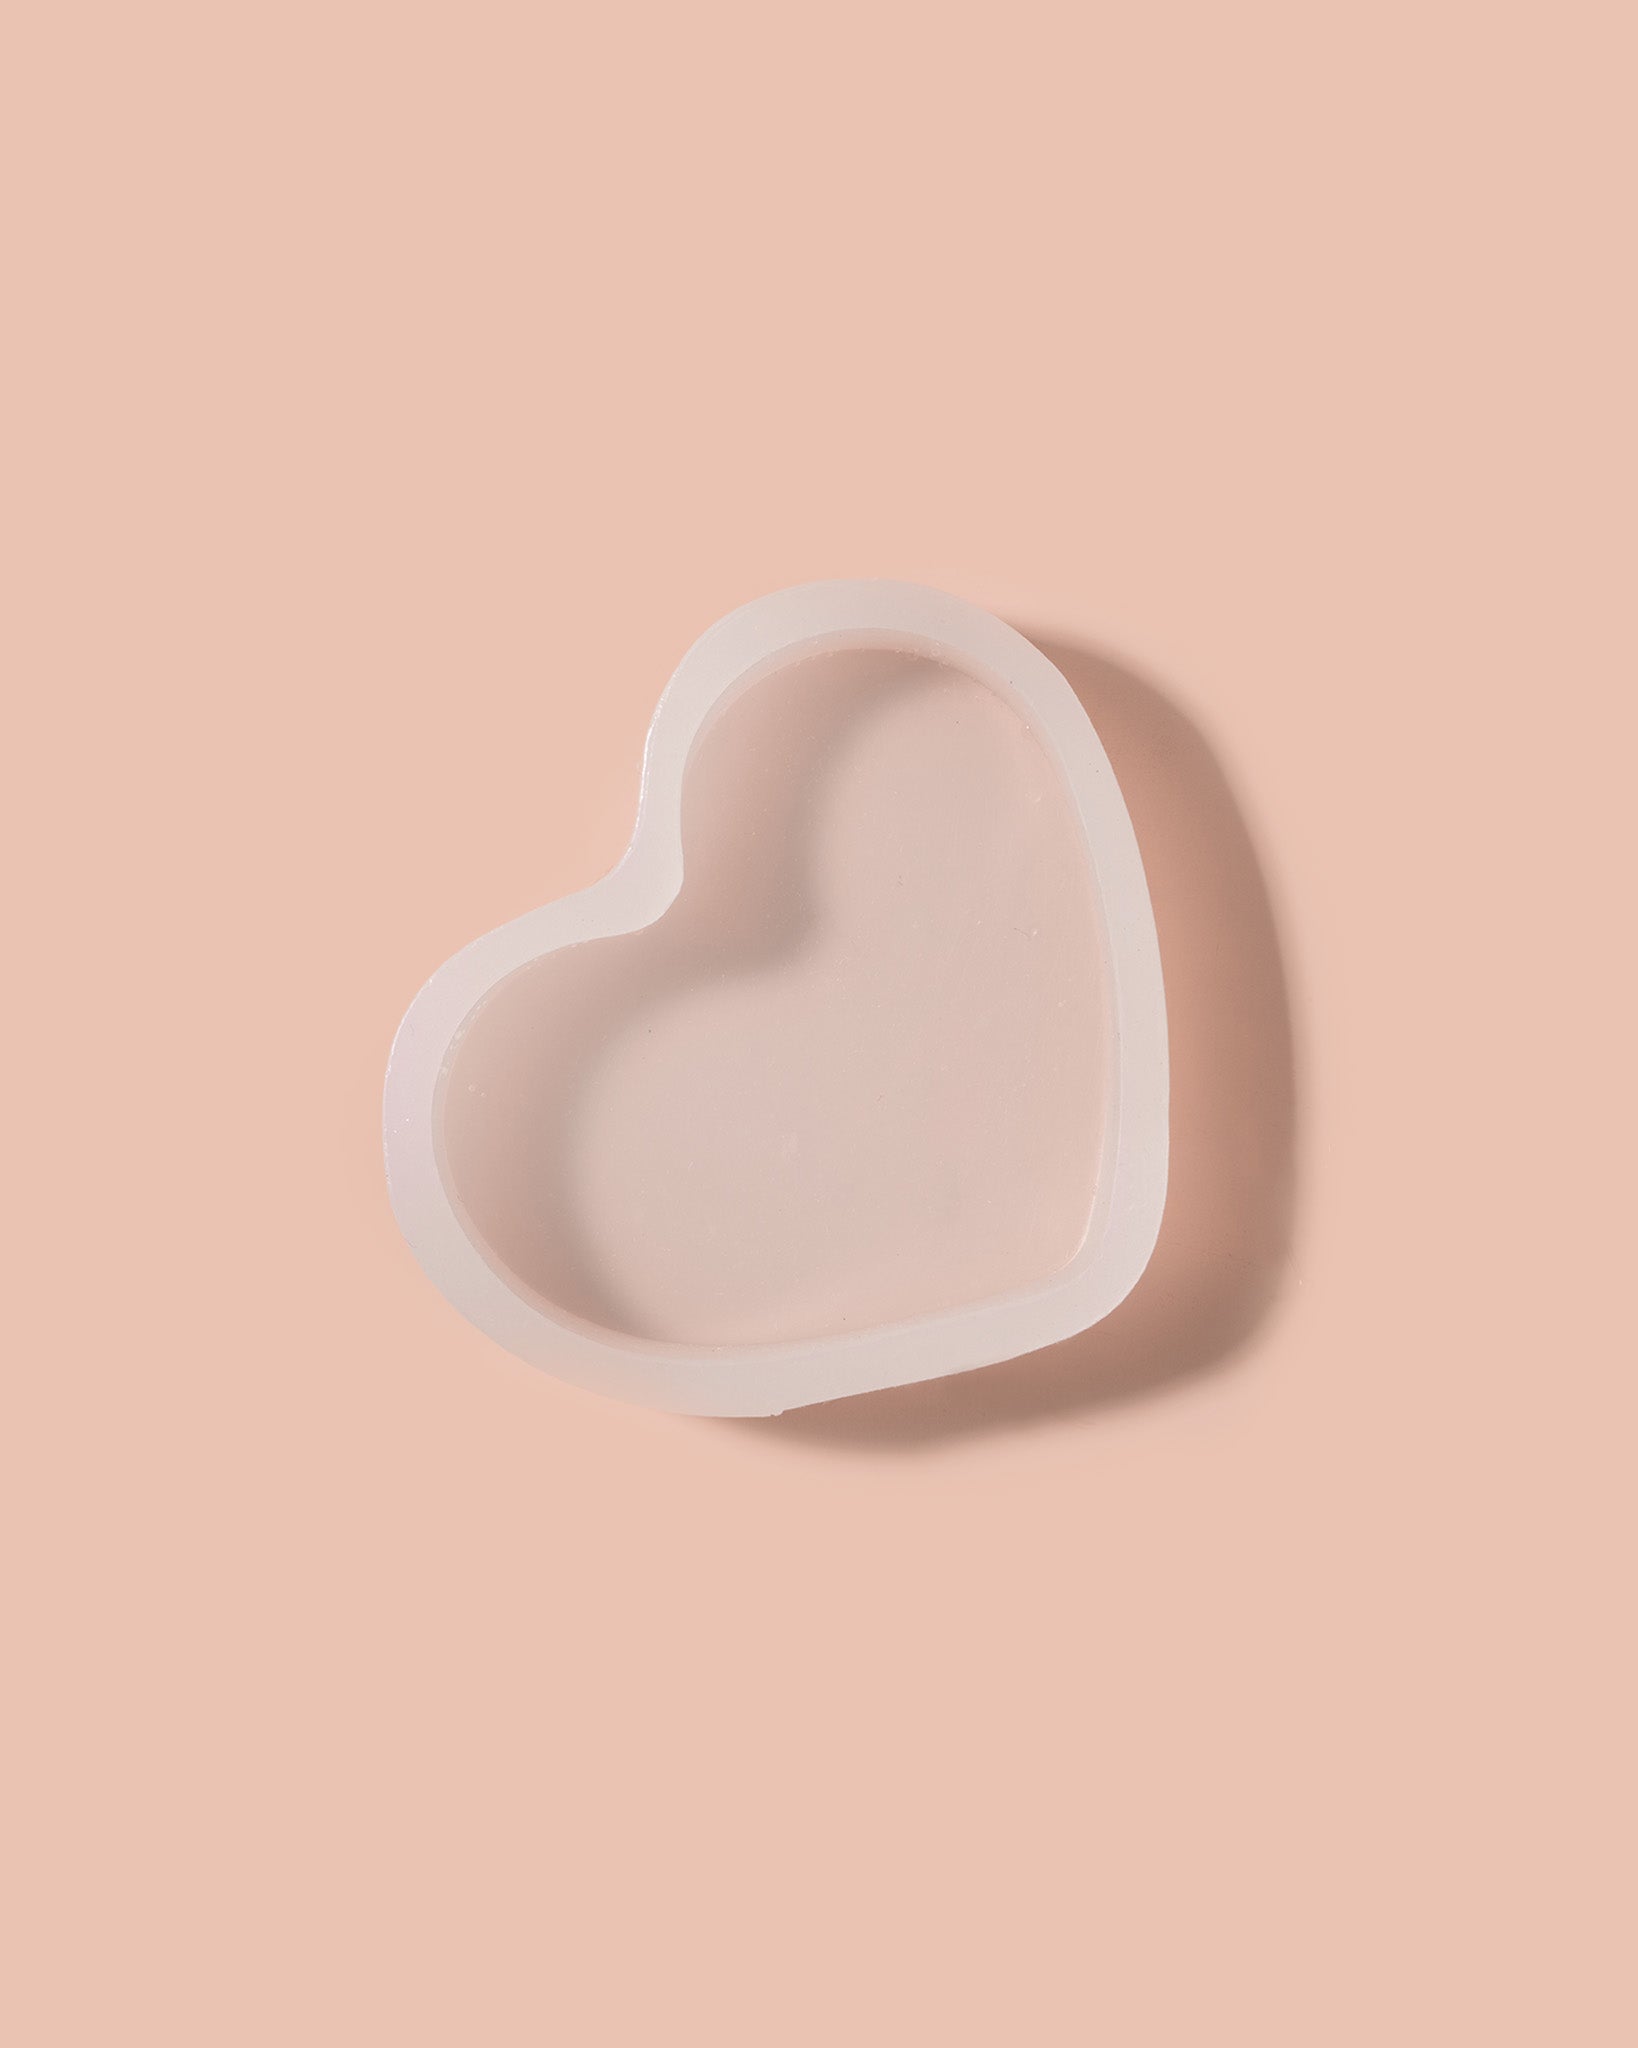 Silicone Heart Mold, 1 Cavity for Soap, Wax Melts or Tarts